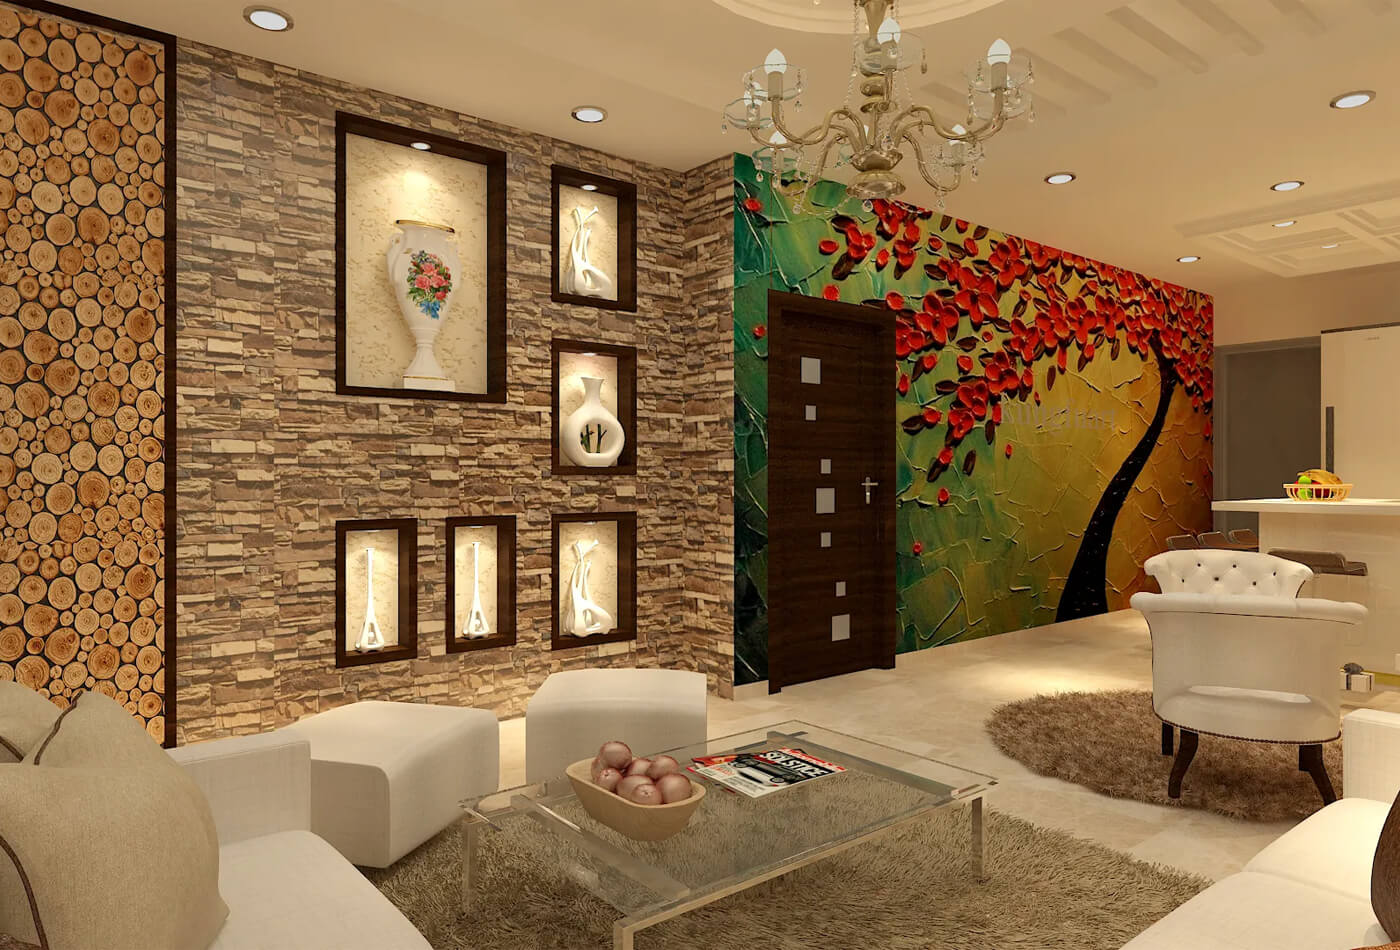 African Design Decor: 7 Stunning Ideas To Change Your Home